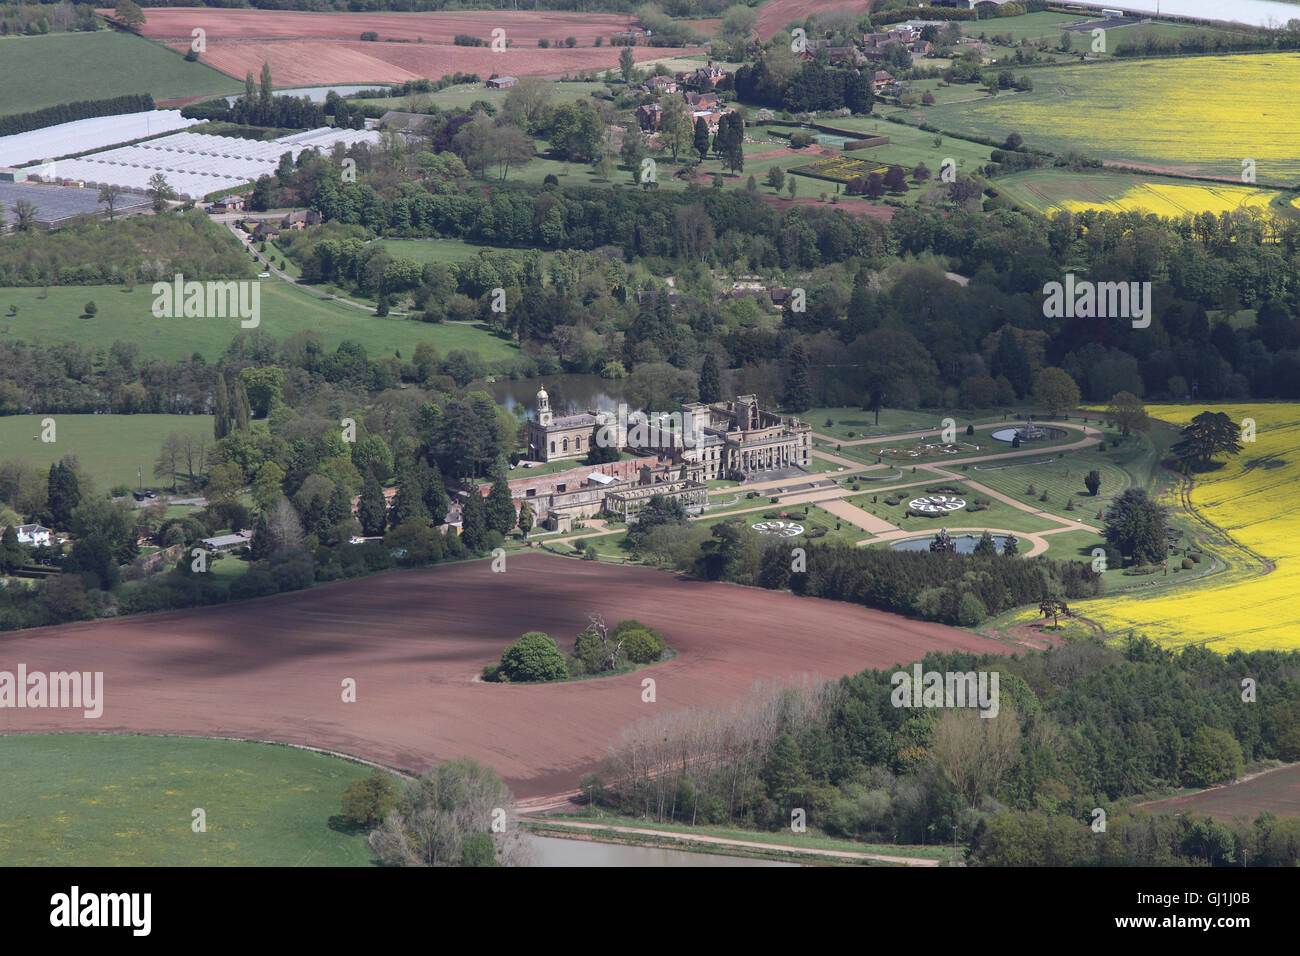 Aerial views of English Heritage Witley Court and gardens near Great Witley set amongst the yellow rapeseed fields of the Worcesterhire countryside Stock Photo